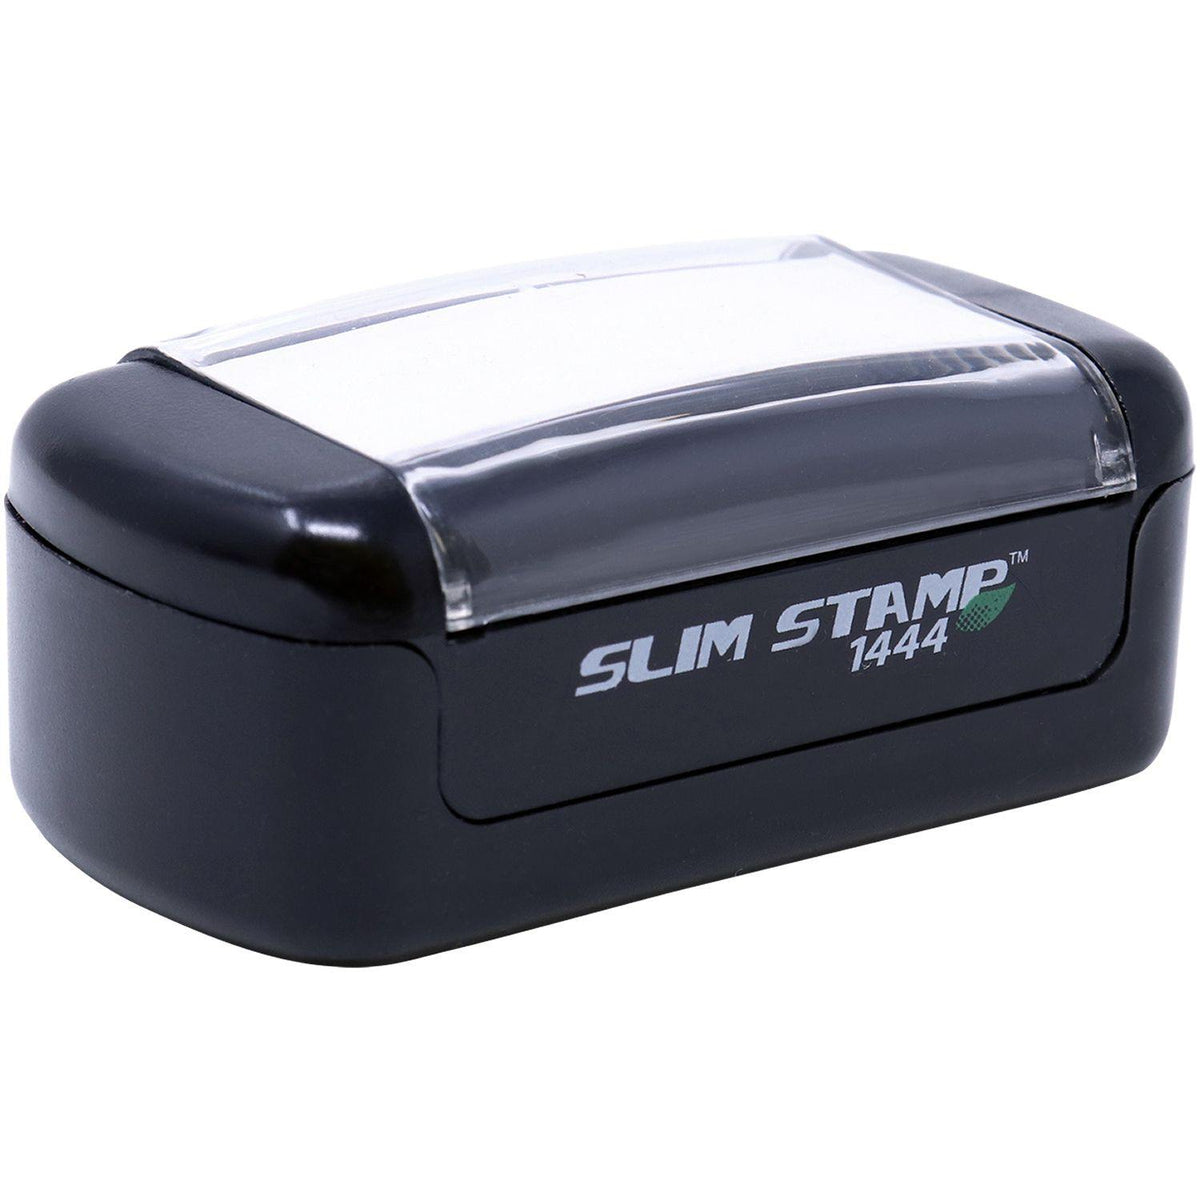 Slim Pre-Inked Aviso Stamp - Engineer Seal Stamps - Brand_Slim, Impression Size_Small, Stamp Type_Pre-Inked Stamp, Type of Use_Finance, Type of Use_Legal, Type of Use_Office